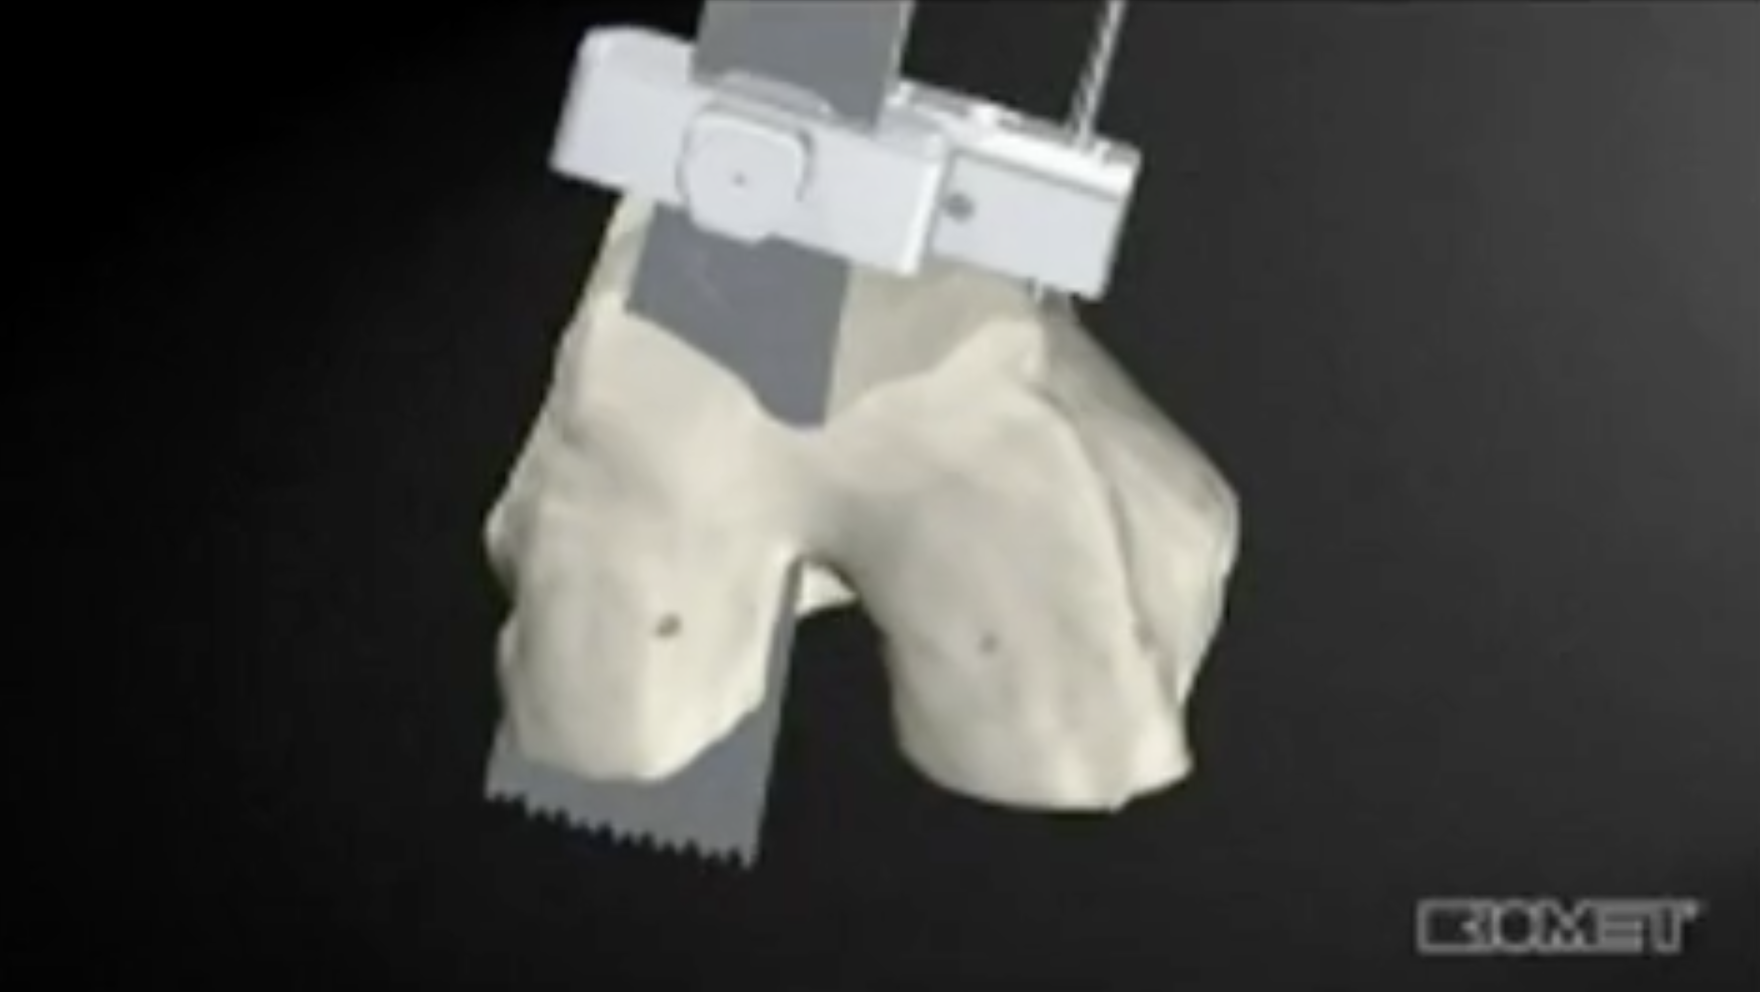 Computer modeling of a total knee replacement.